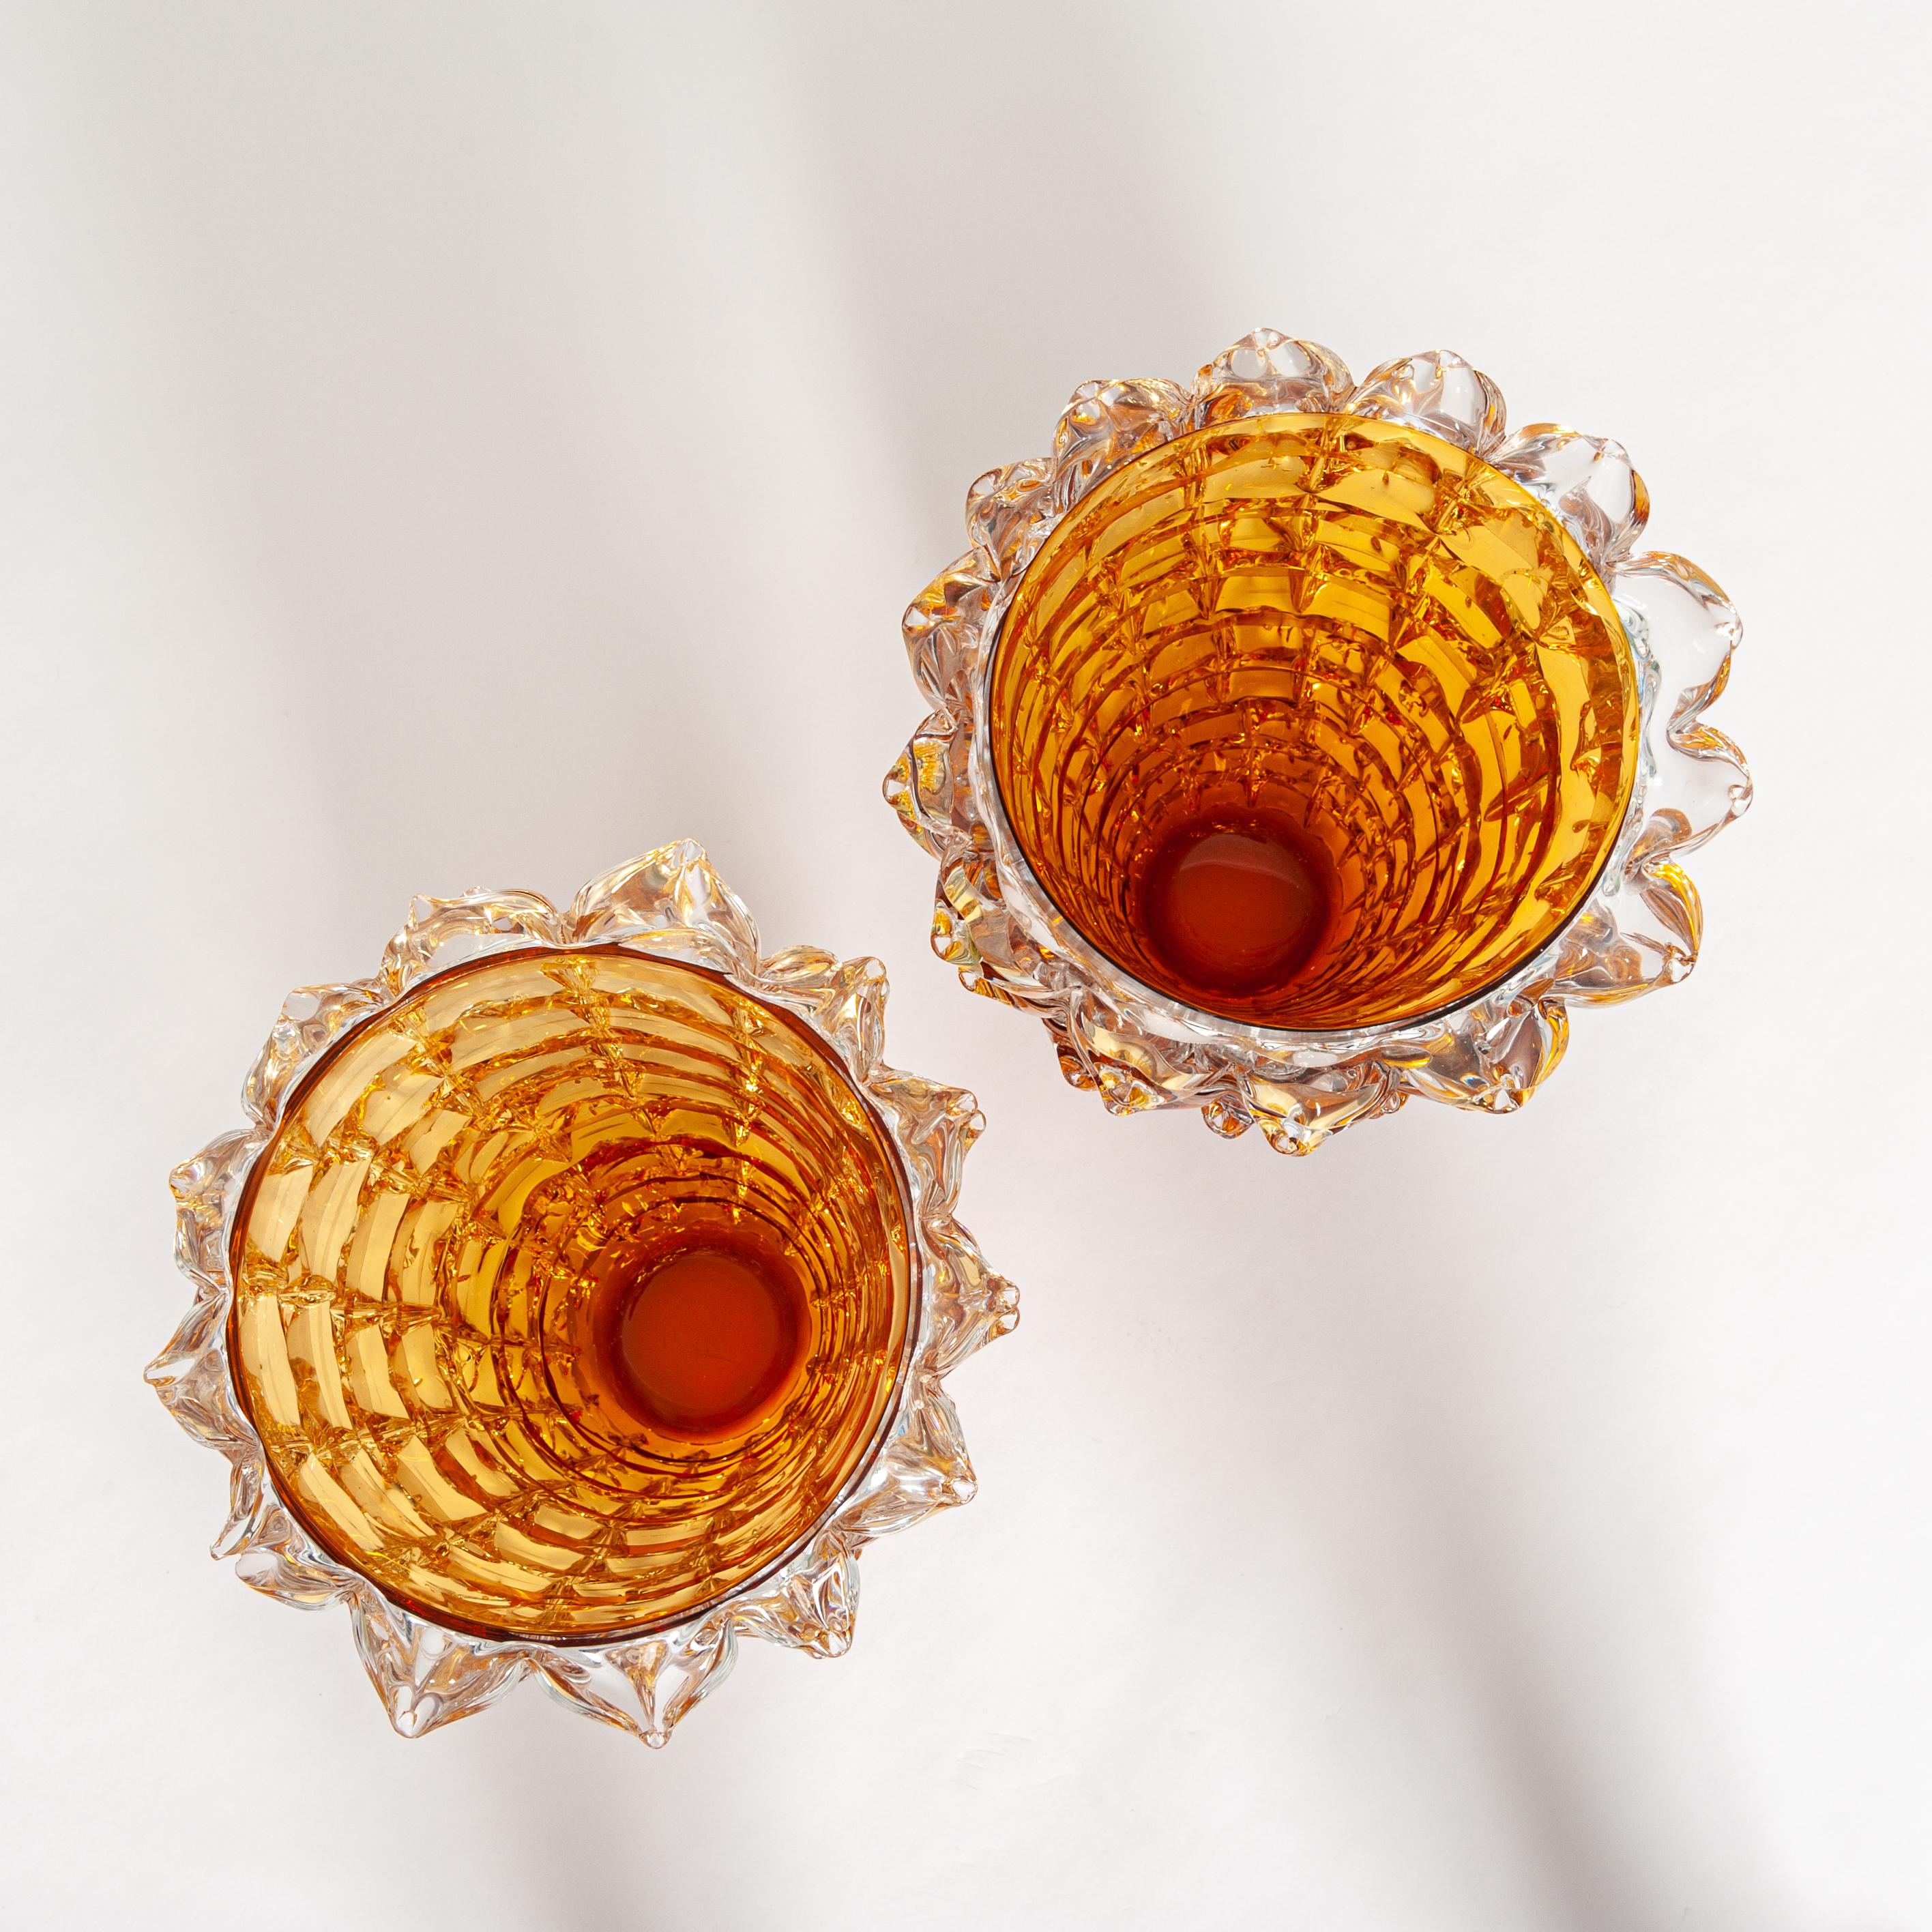 Pair of Amber Colored Vases in Murano Glass with Spikes Decor, Signed Costantini 5